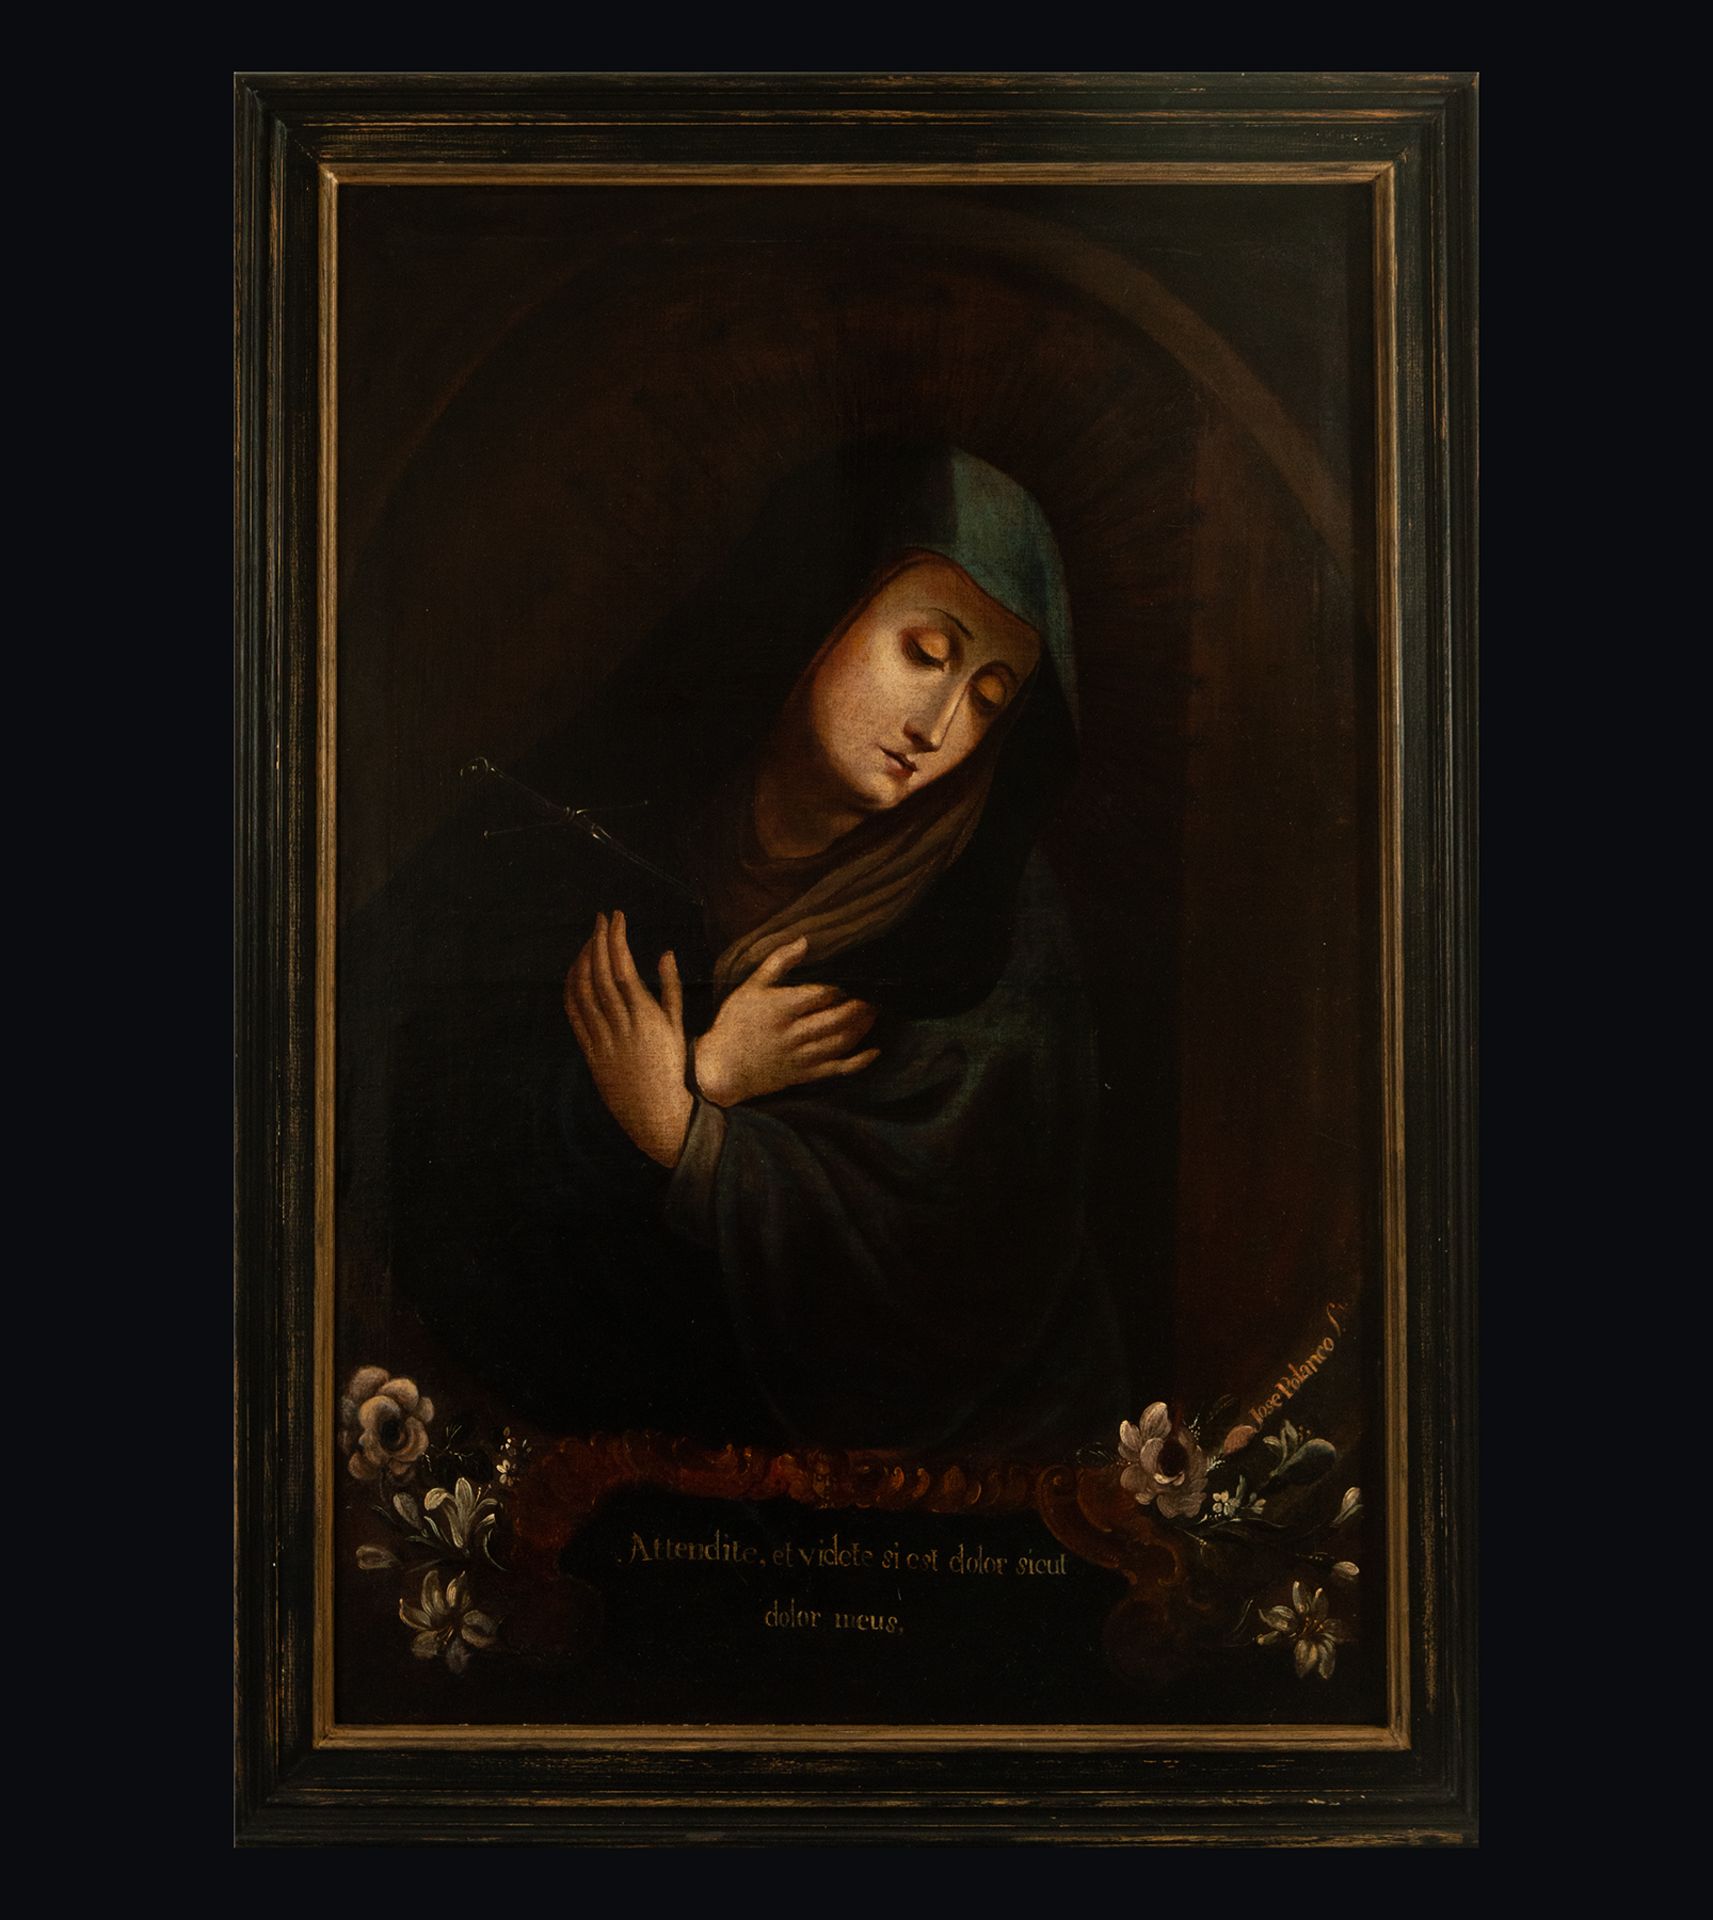 Signed Jose Polanco, Mexican school of the 19th C, Our Lady of Sorrows